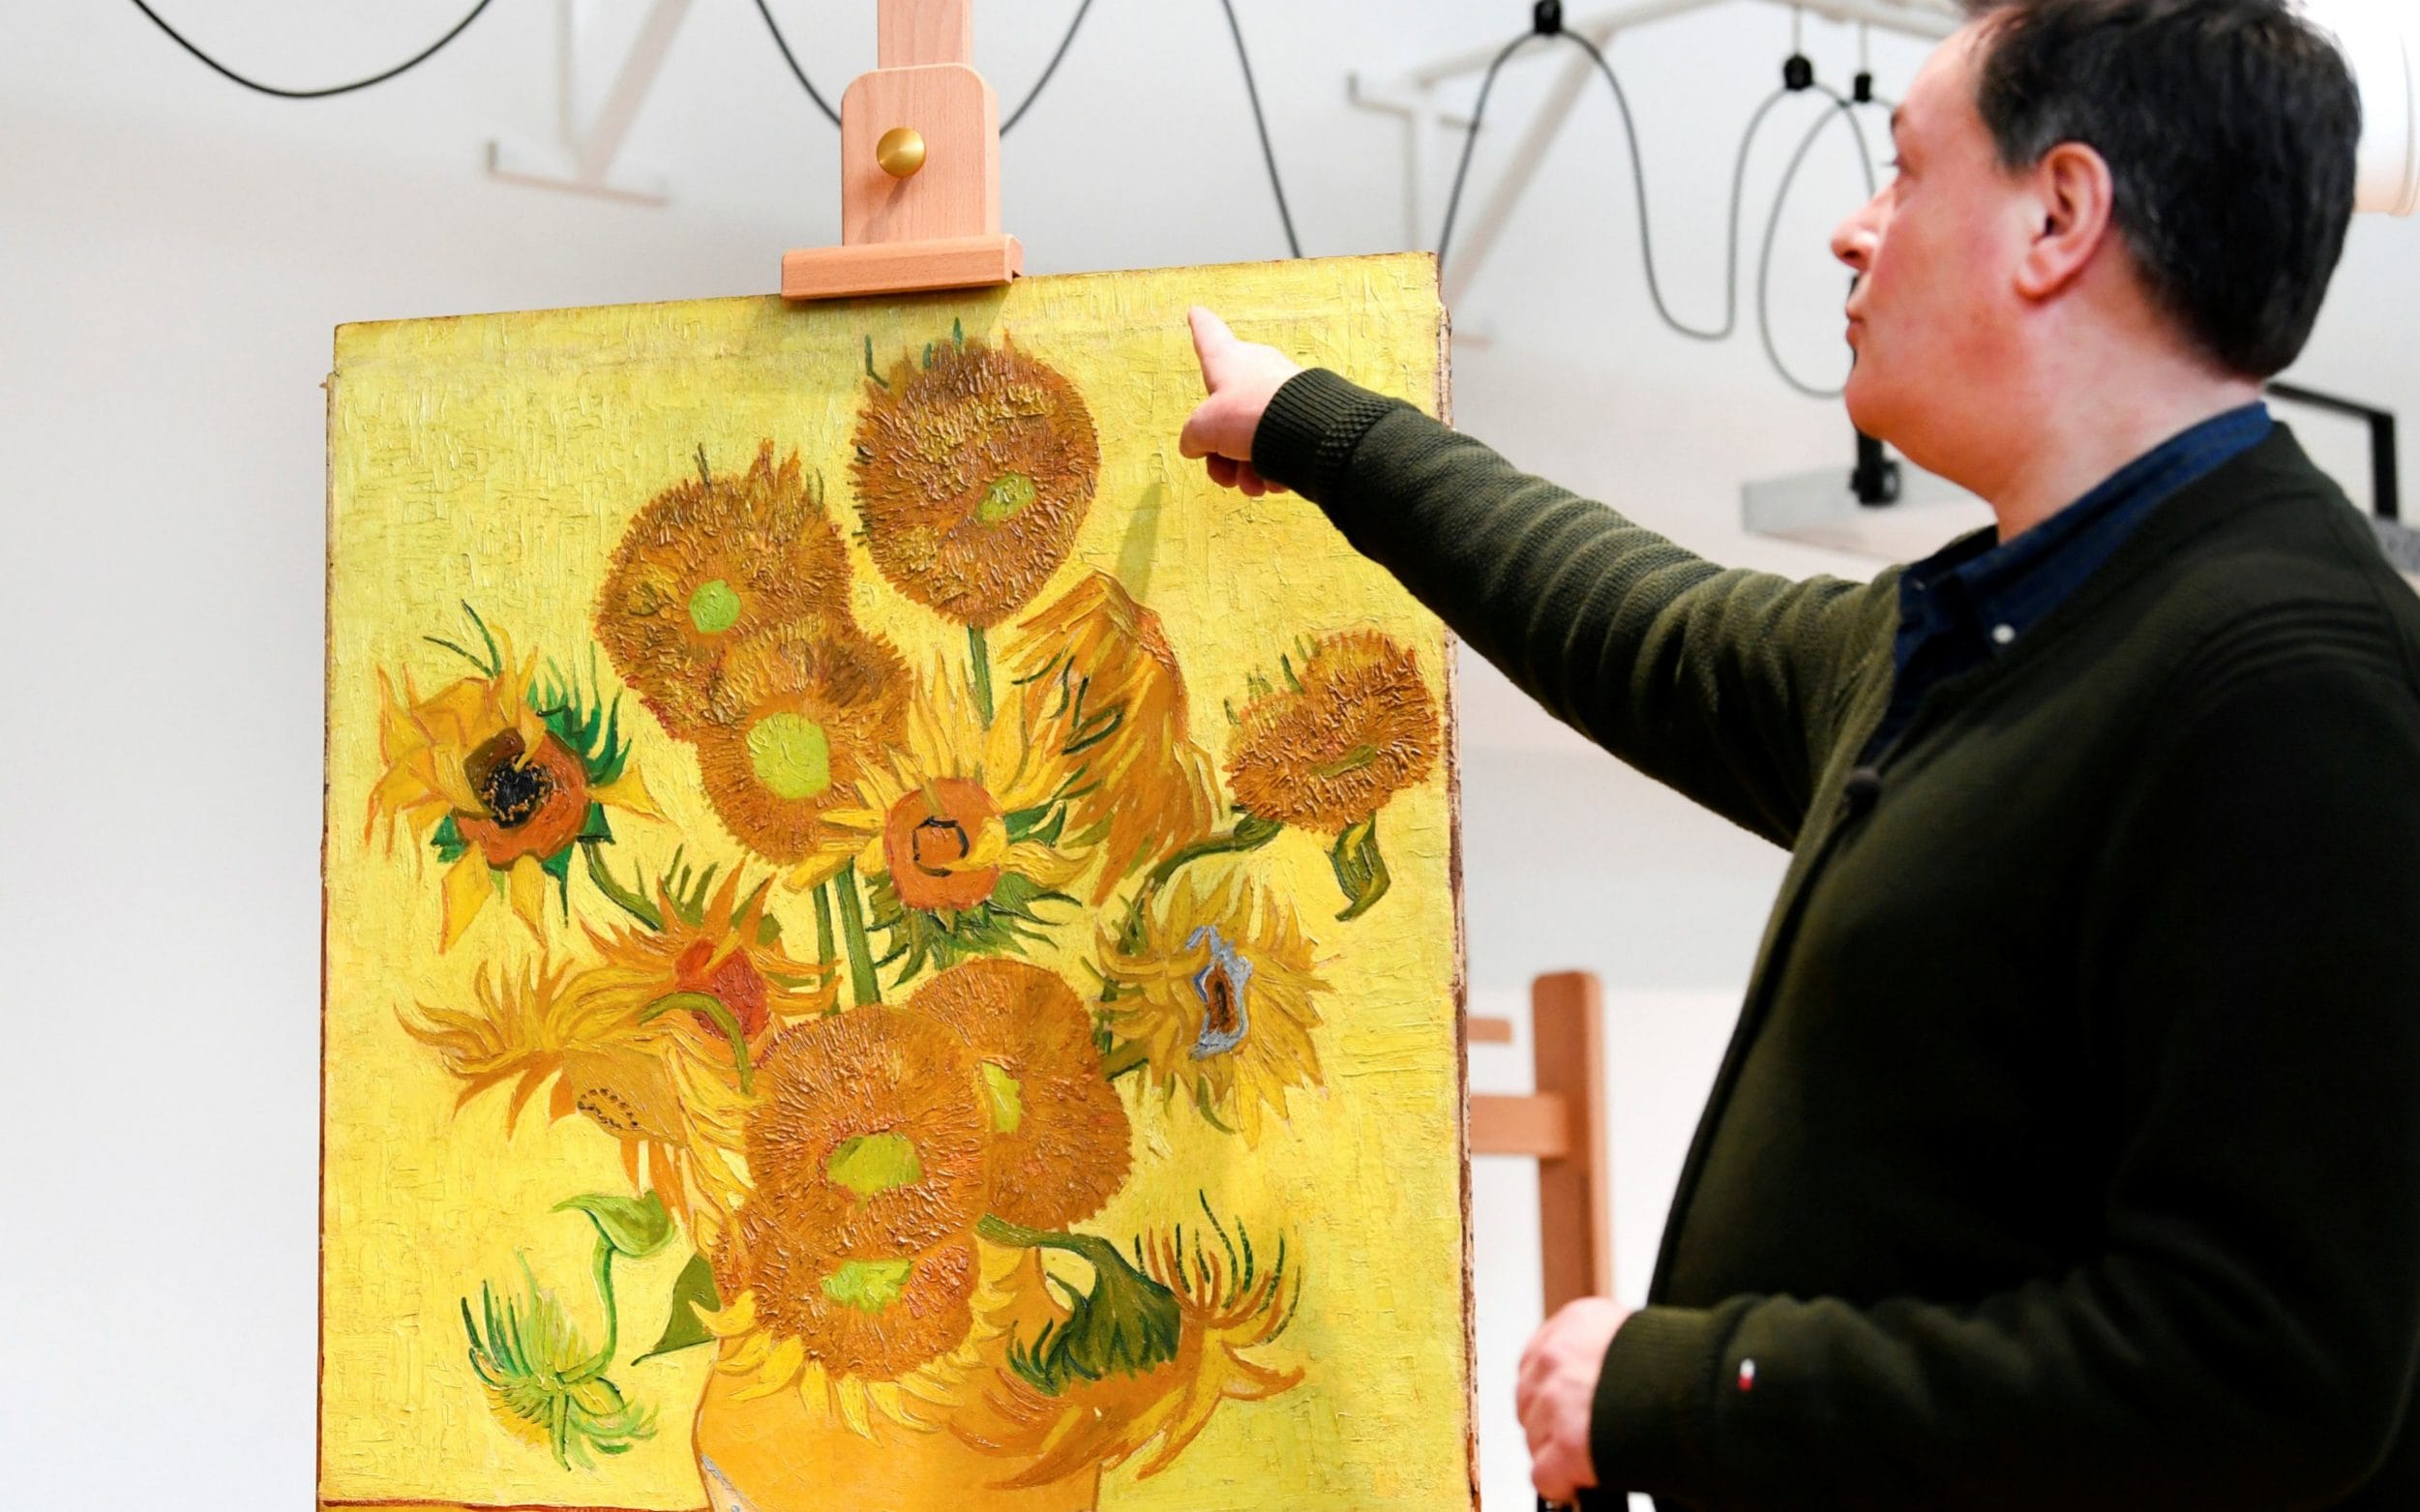 Frail at 130, Van Gogh's 'Sunflowers' will stay home from now on